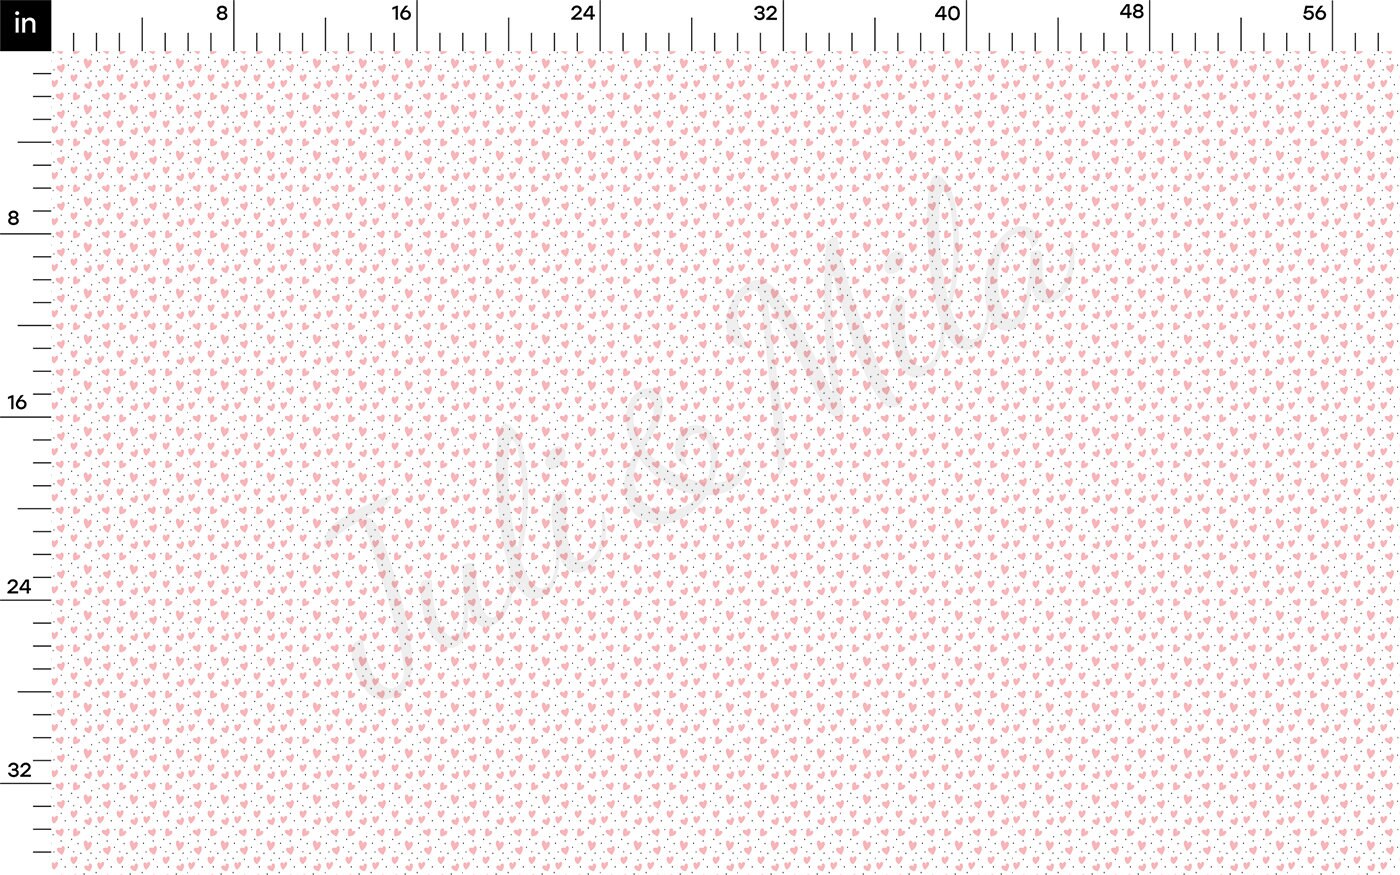 DBP Fabric Double Brushed Polyester DBP2478 Valentine's Day